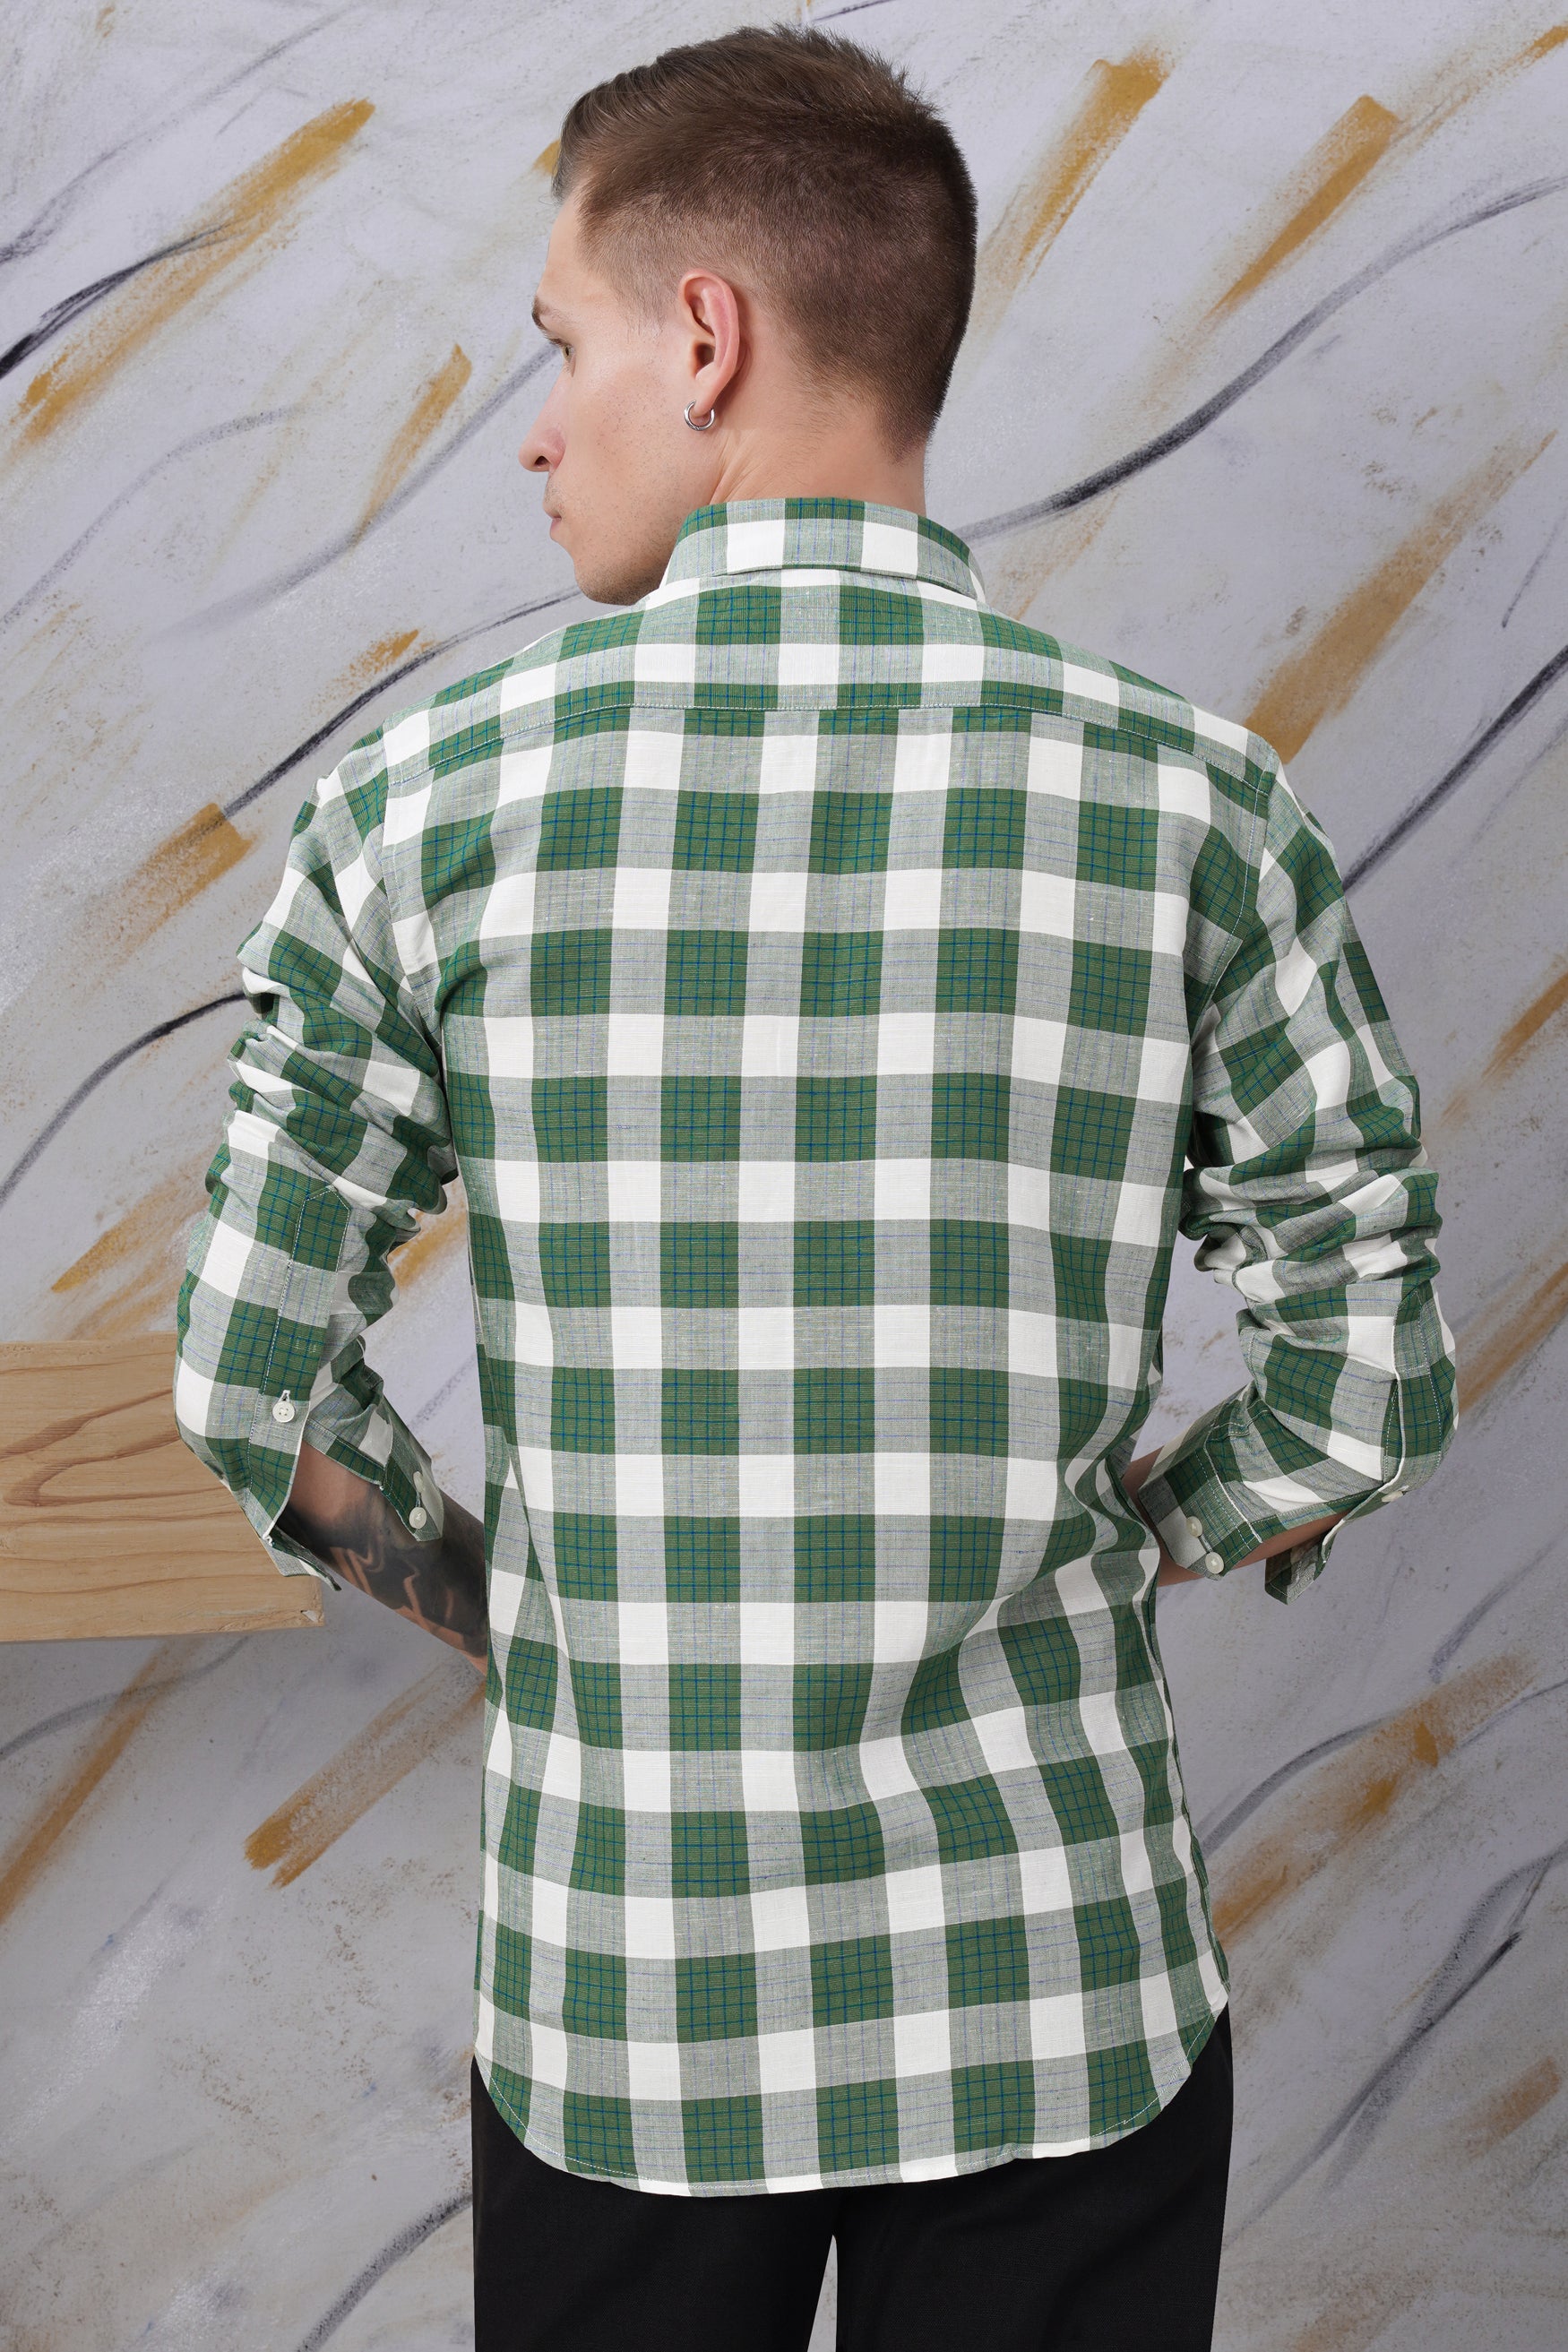 Pine Green and Pumice Gray Checkered Luxurious Linen Shirt 11684-BD-38, 11684-BD-H-38, 11684-BD-39, 11684-BD-H-39, 11684-BD-40, 11684-BD-H-40, 11684-BD-42, 11684-BD-H-42, 11684-BD-44, 11684-BD-H-44, 11684-BD-46, 11684-BD-H-46, 11684-BD-48, 11684-BD-H-48, 11684-BD-50, 11684-BD-H-50, 11684-BD-52, 11684-BD-H-52